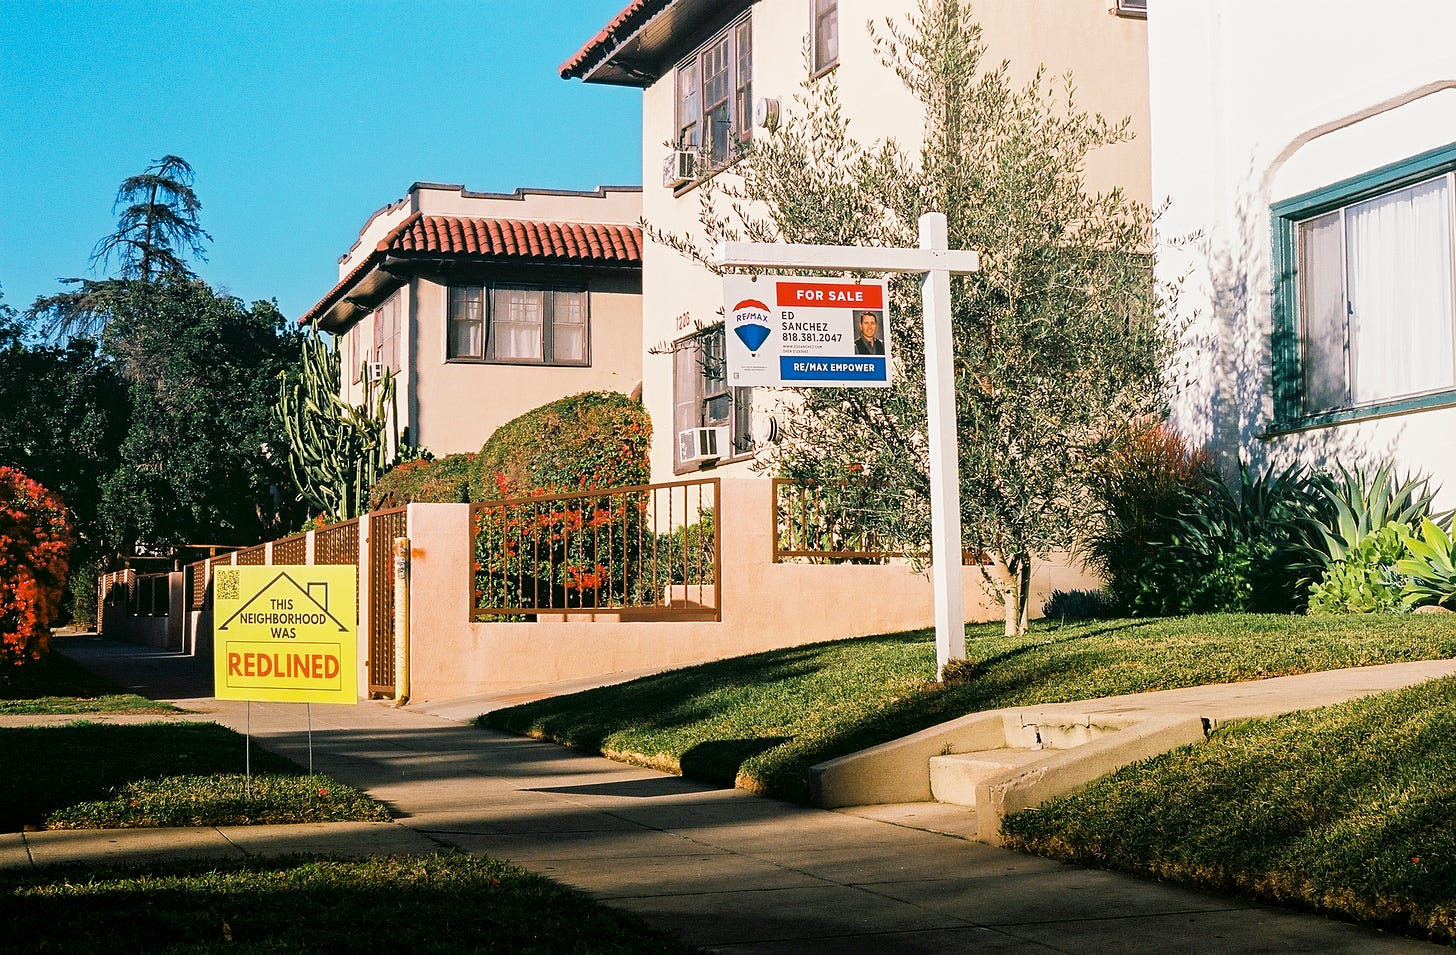 Photograph of a residential building for sale on a street with other residential buildings and one of my yard signs in the front yard across from a For Sale sign.